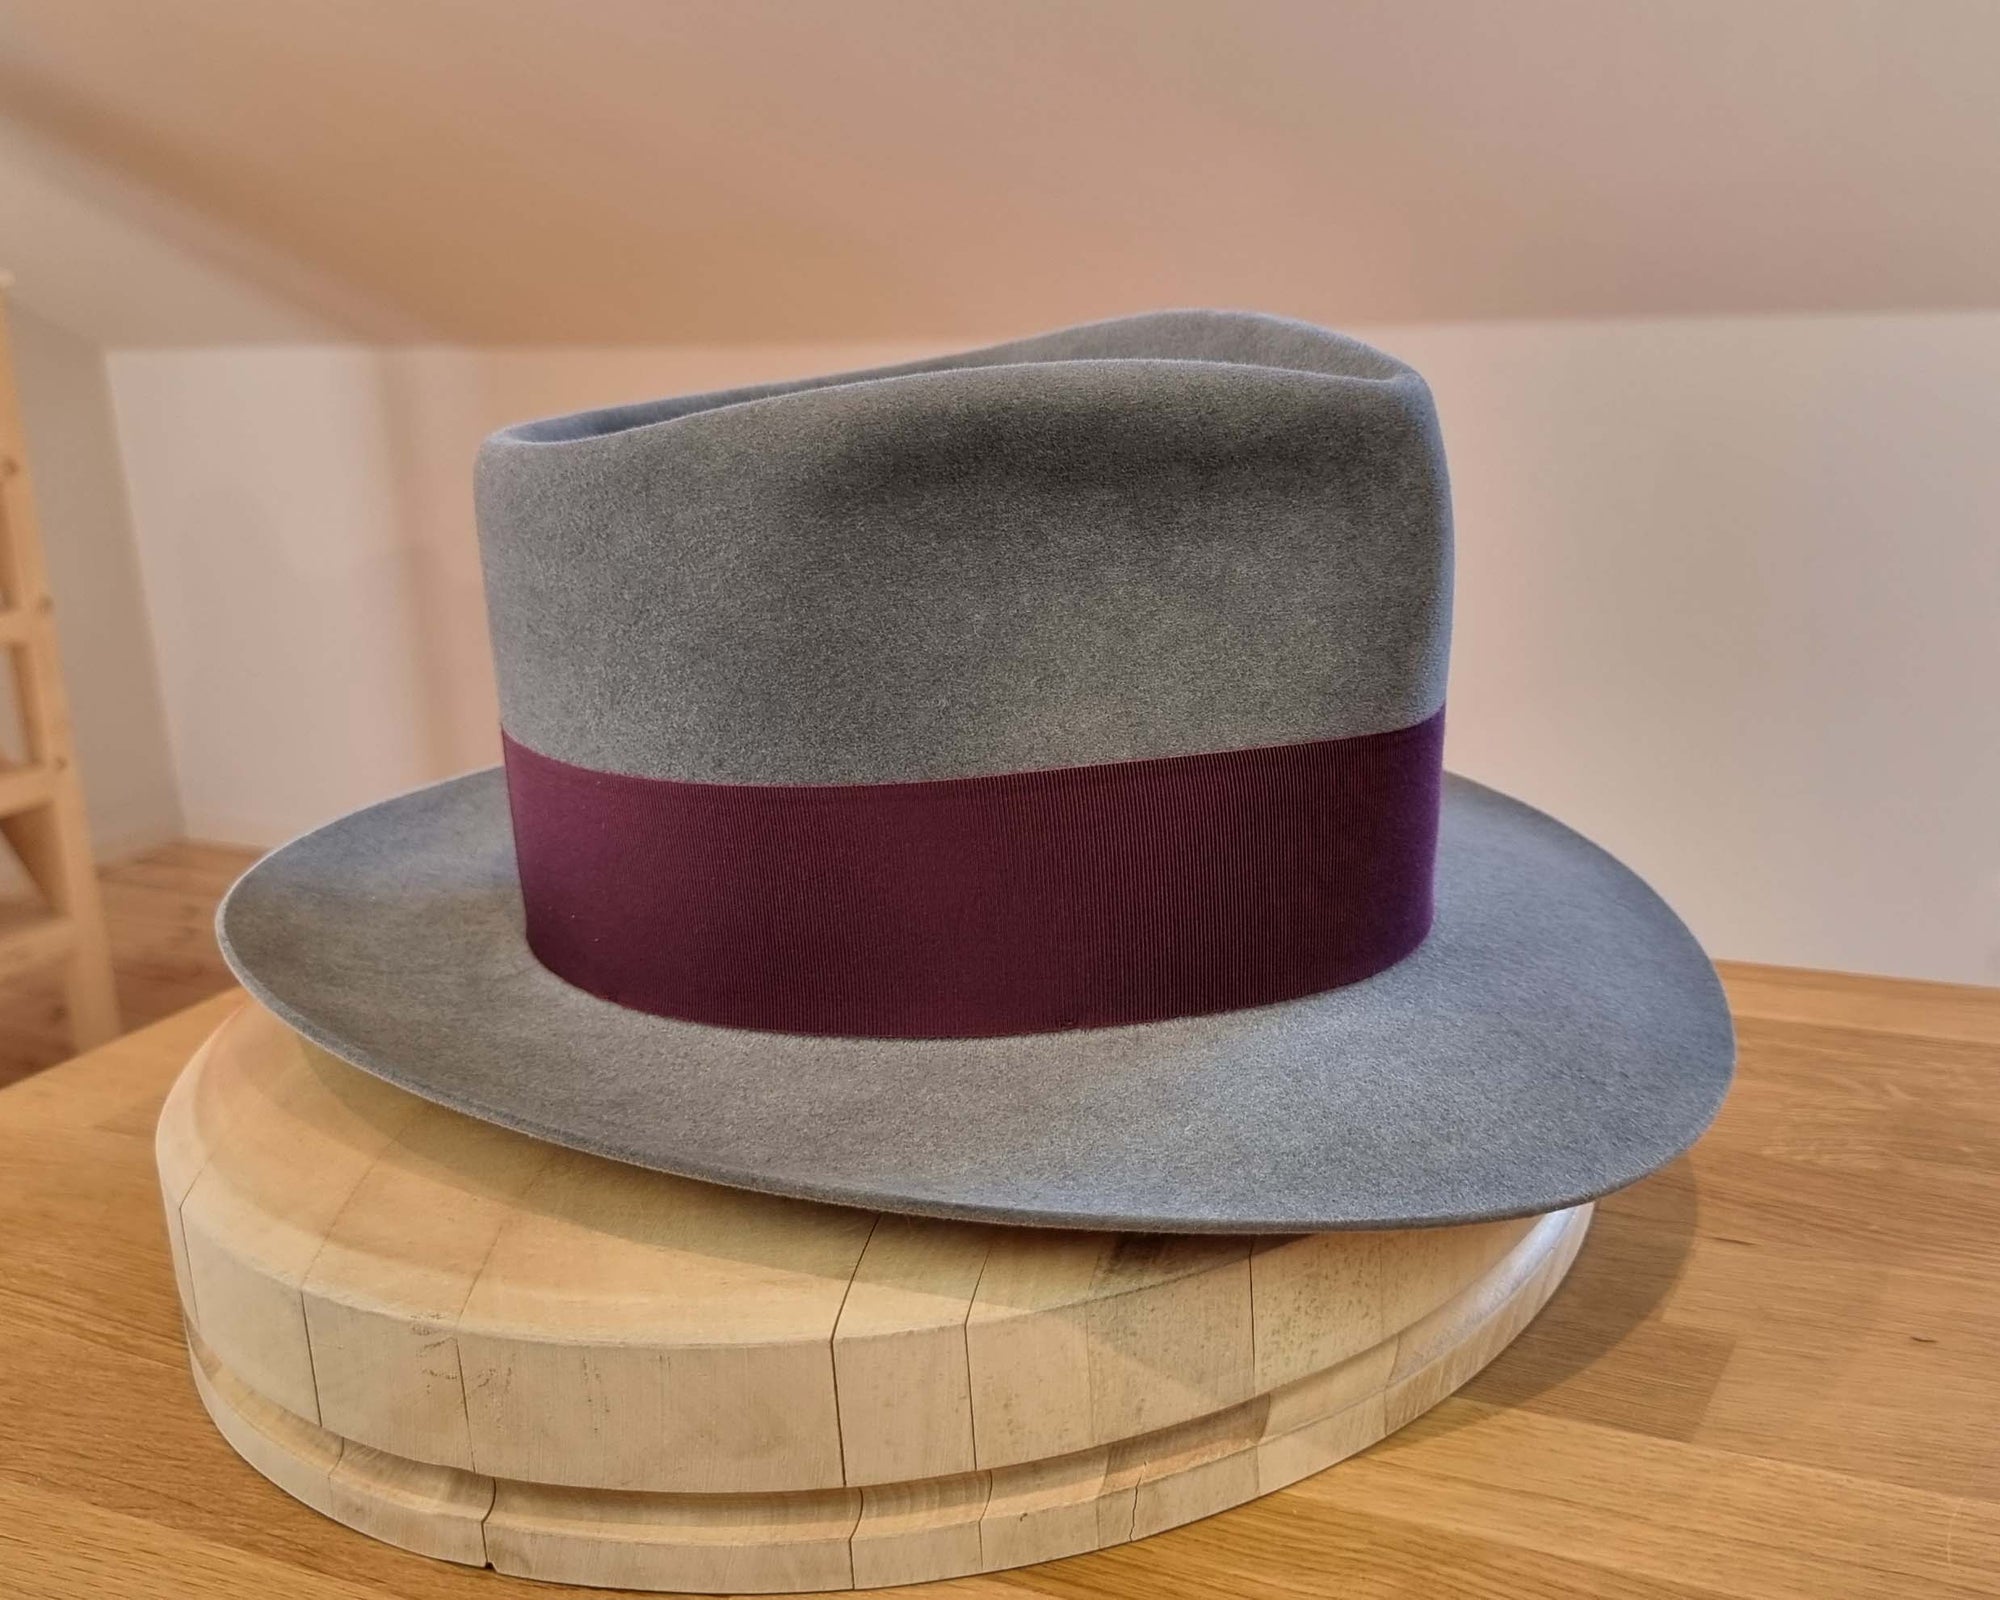 WHIPPET FEDORA | 100X NUTRIA | STEEL COLOR | SIZE 59, US 7 3/8